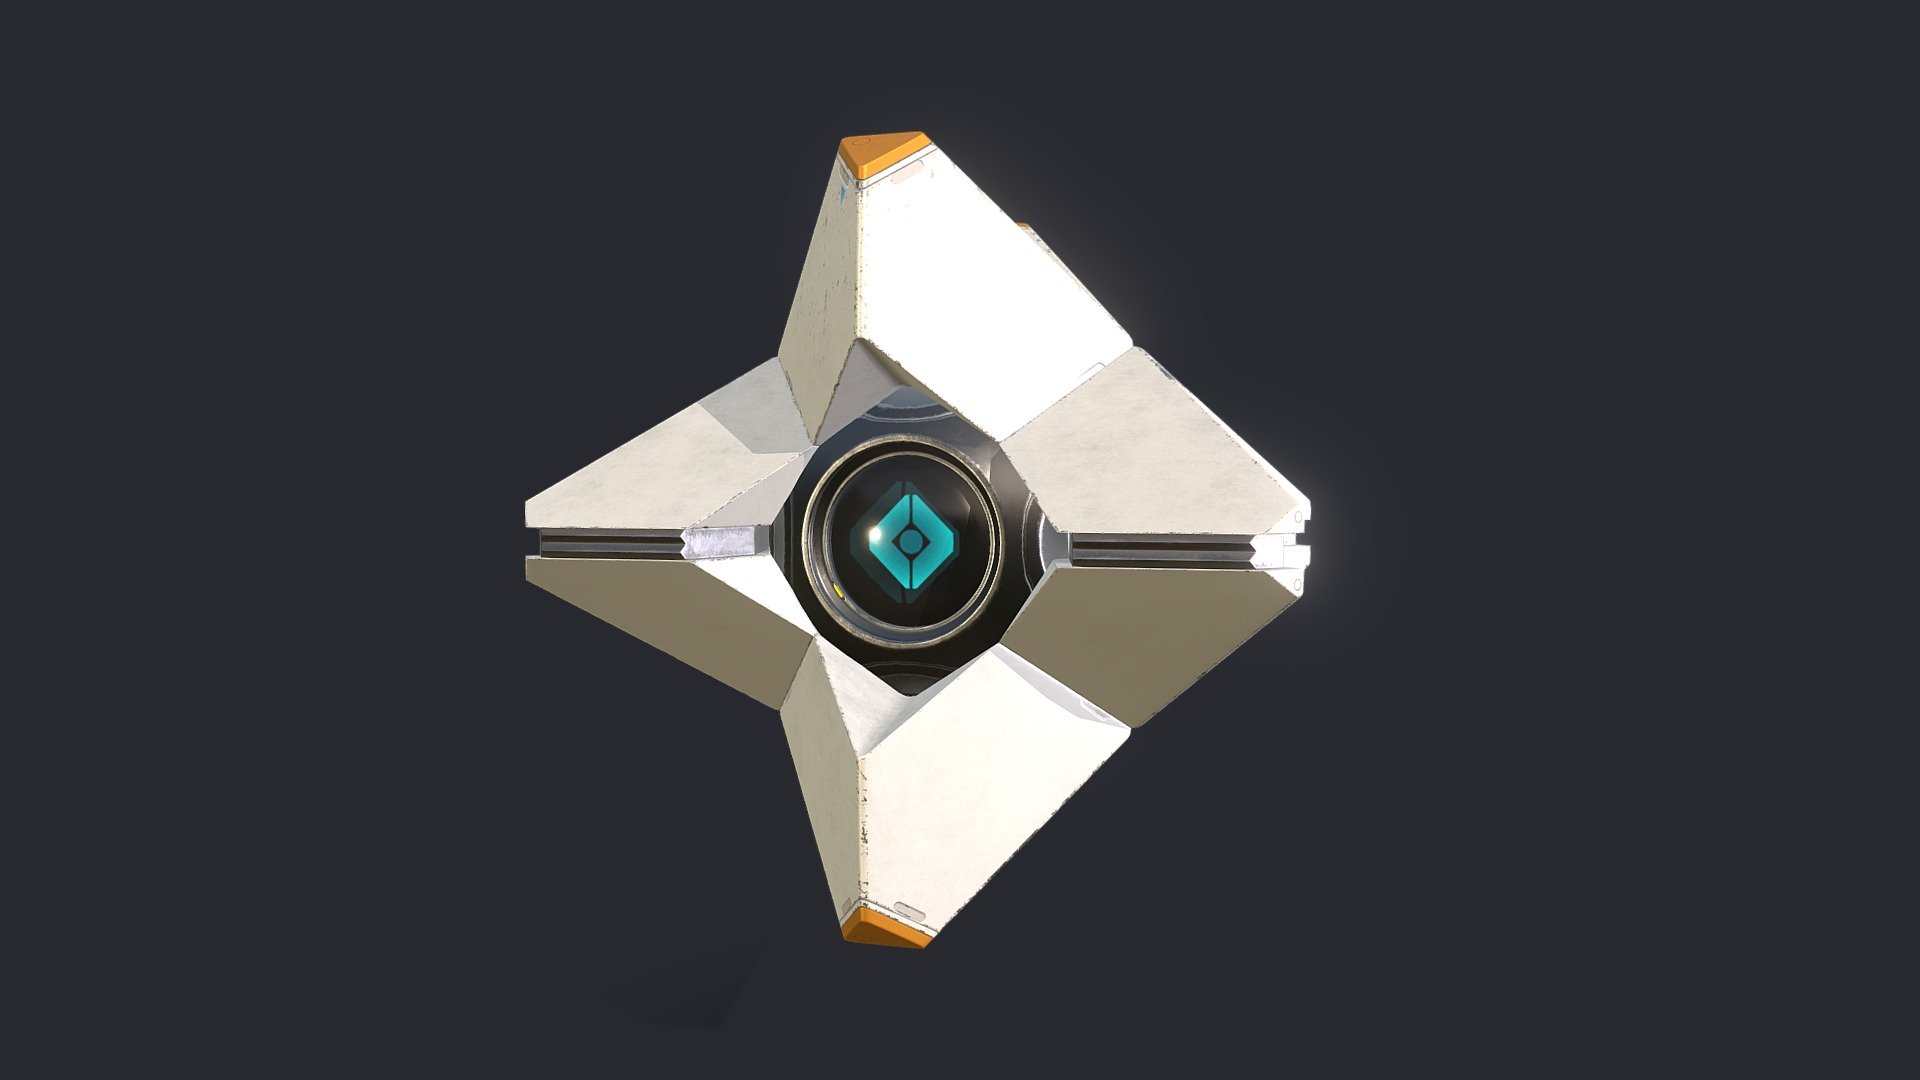 I've been playing Destiny 2 for quite some time and I wanted to make a small fanart of Ghost 3d model